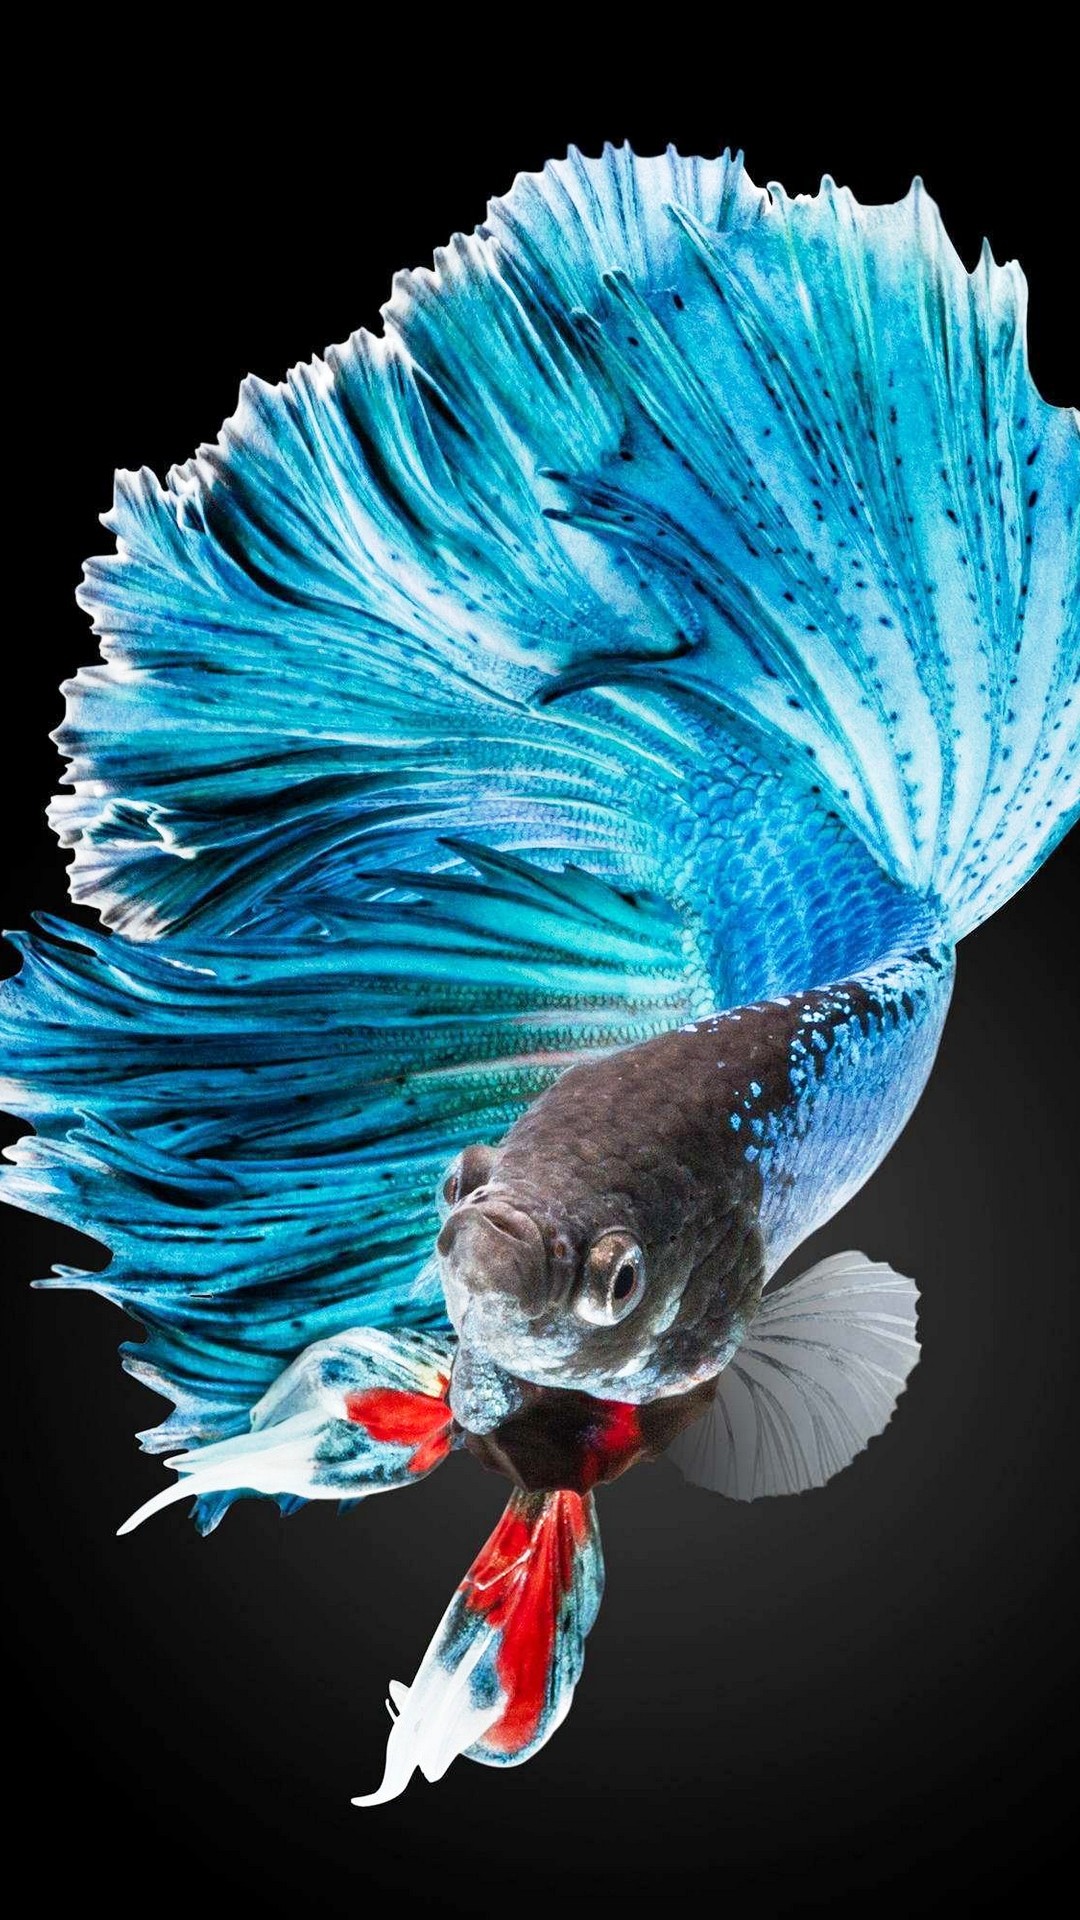 iphone 6 plus wallpaper,blue,turquoise,fish,fish,tail